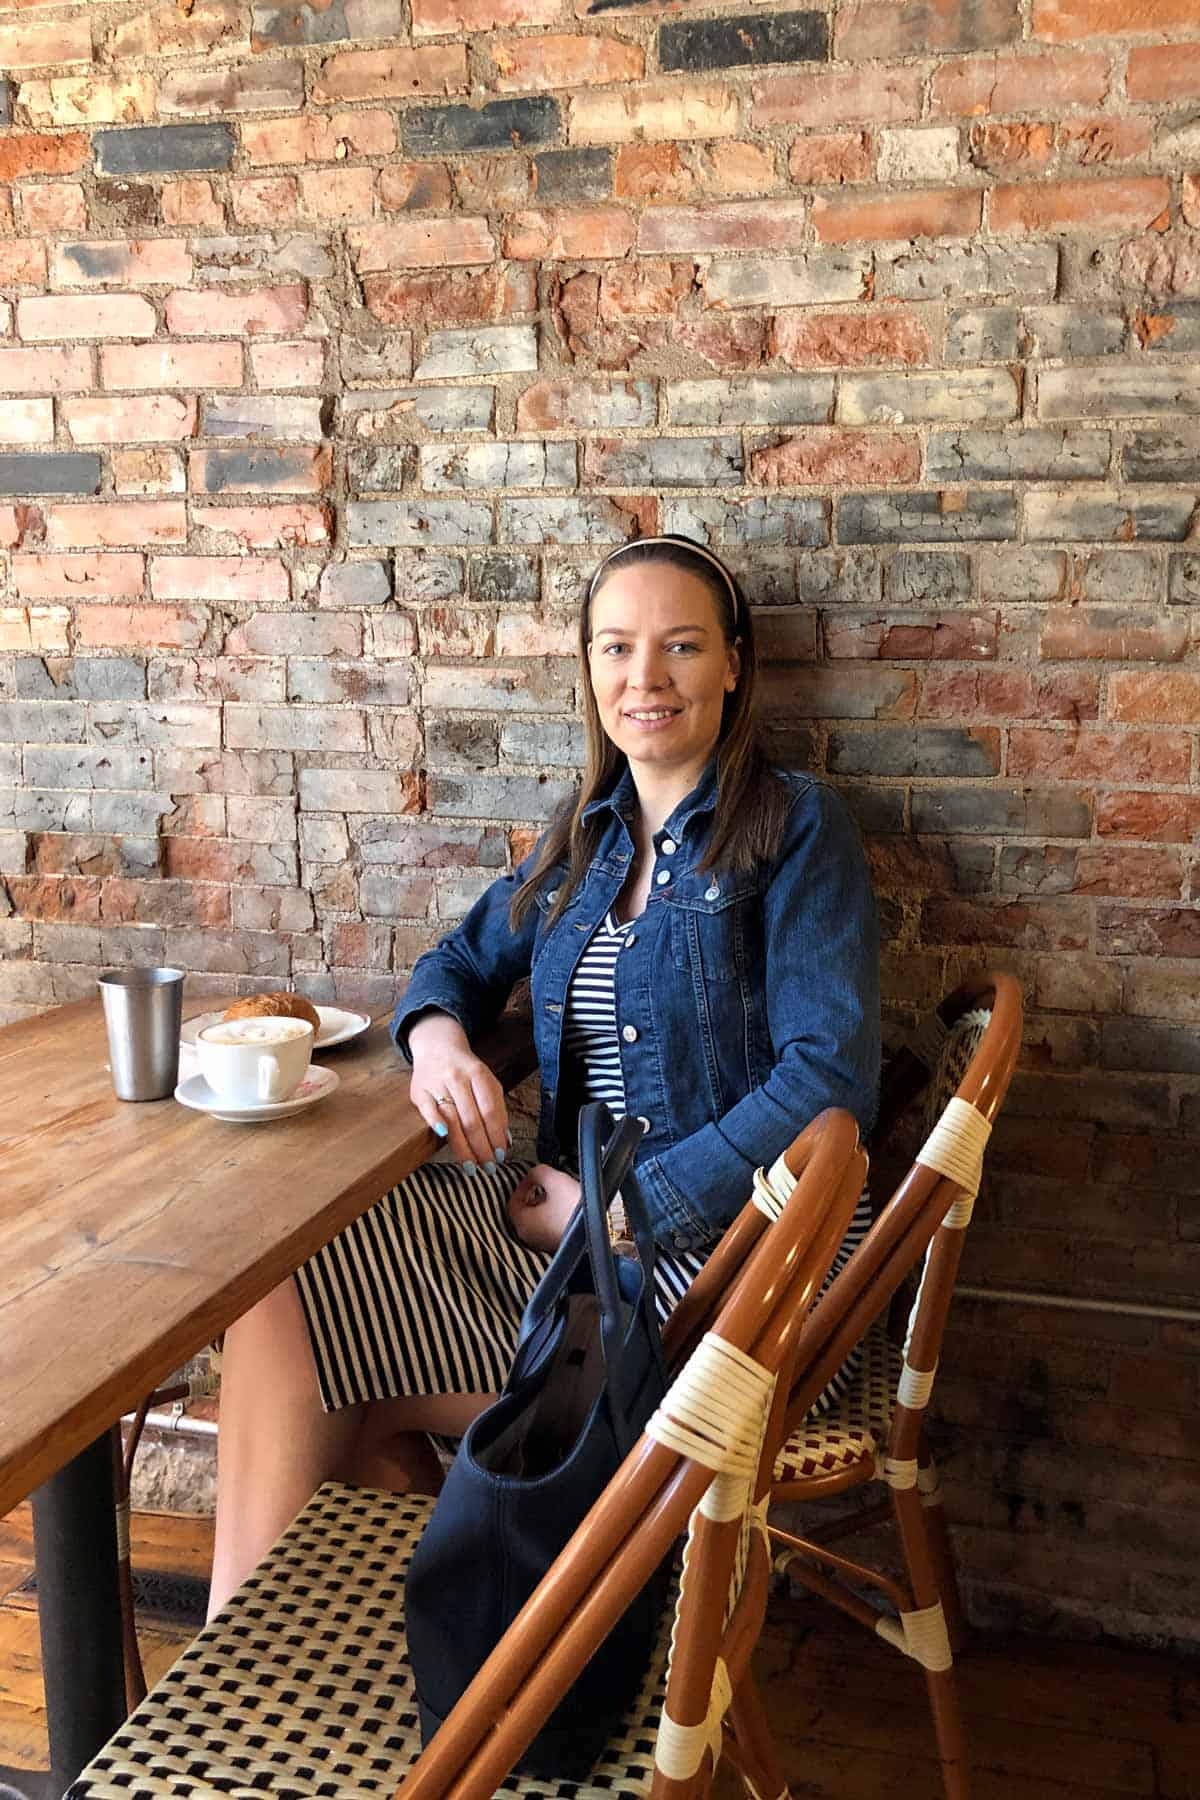 Natasa sitting on a chair in a coffee shop next to a brick wall.